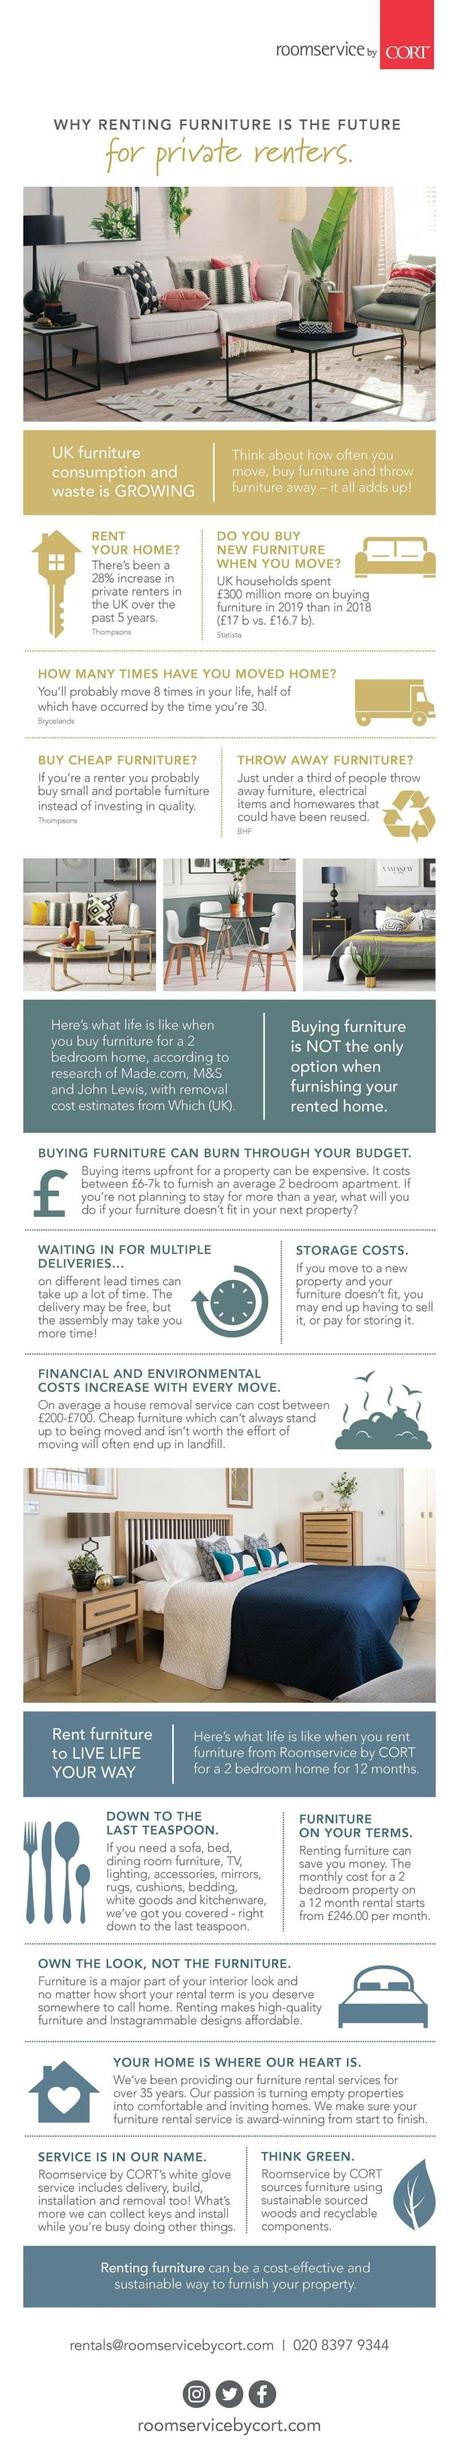 9 Ways to Furnish Your Home Sustainably on a Budget - Paperblog